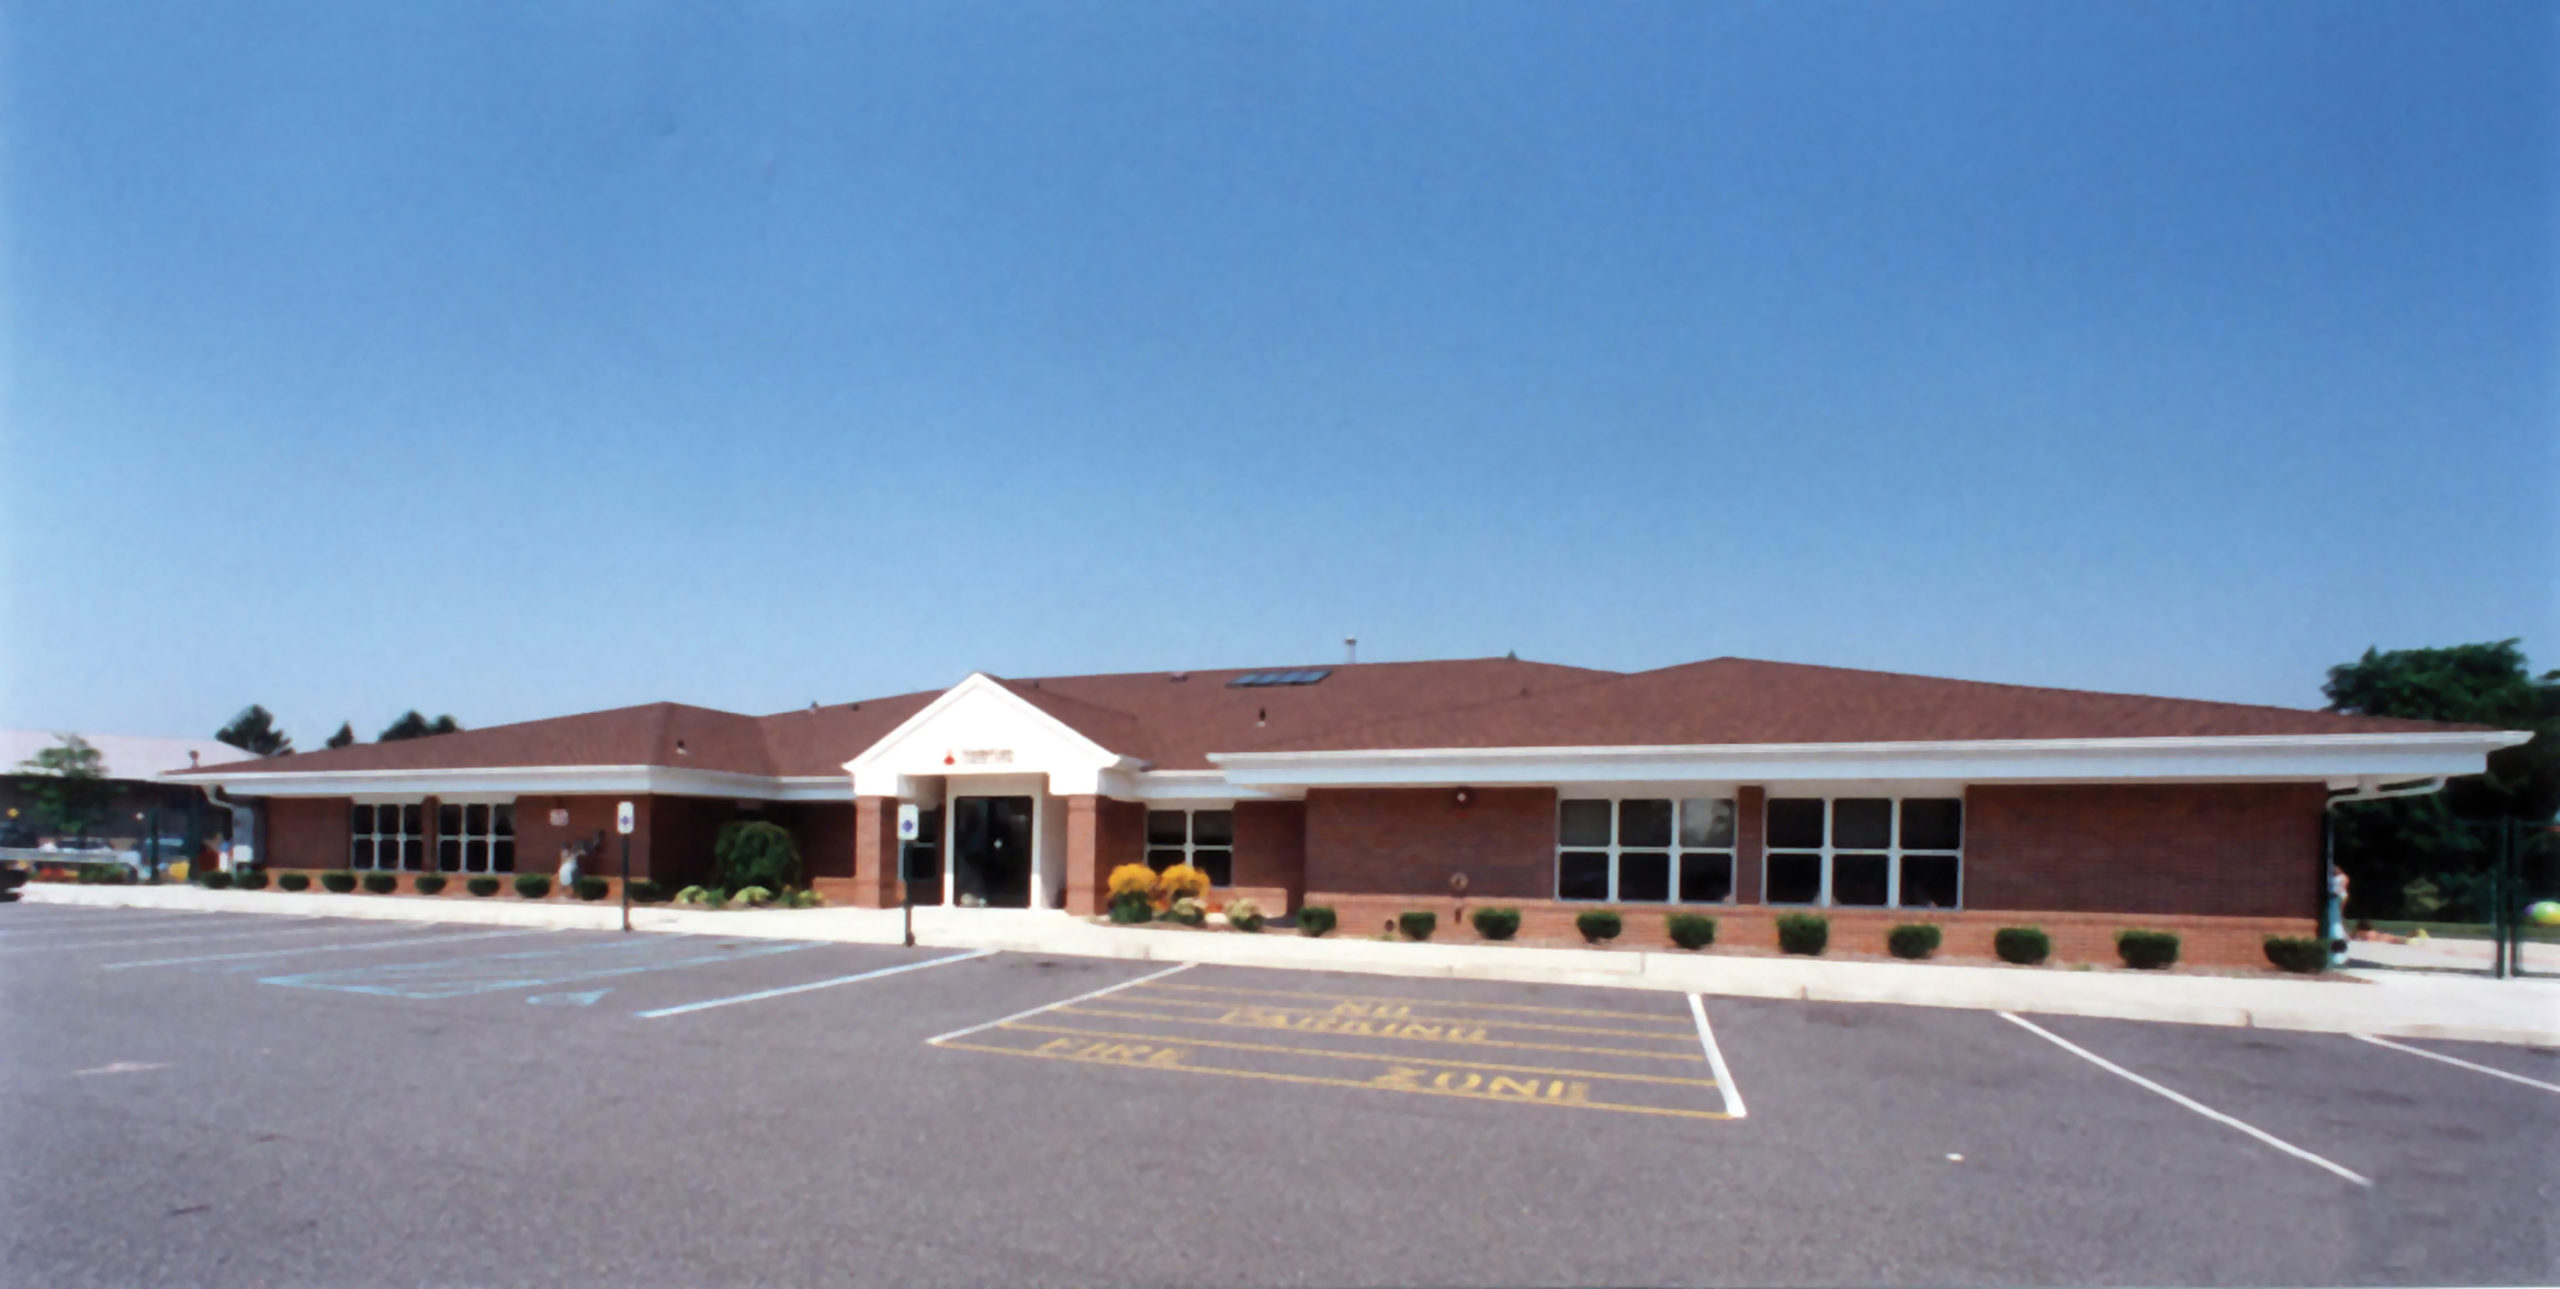 Exterior of Kindercare